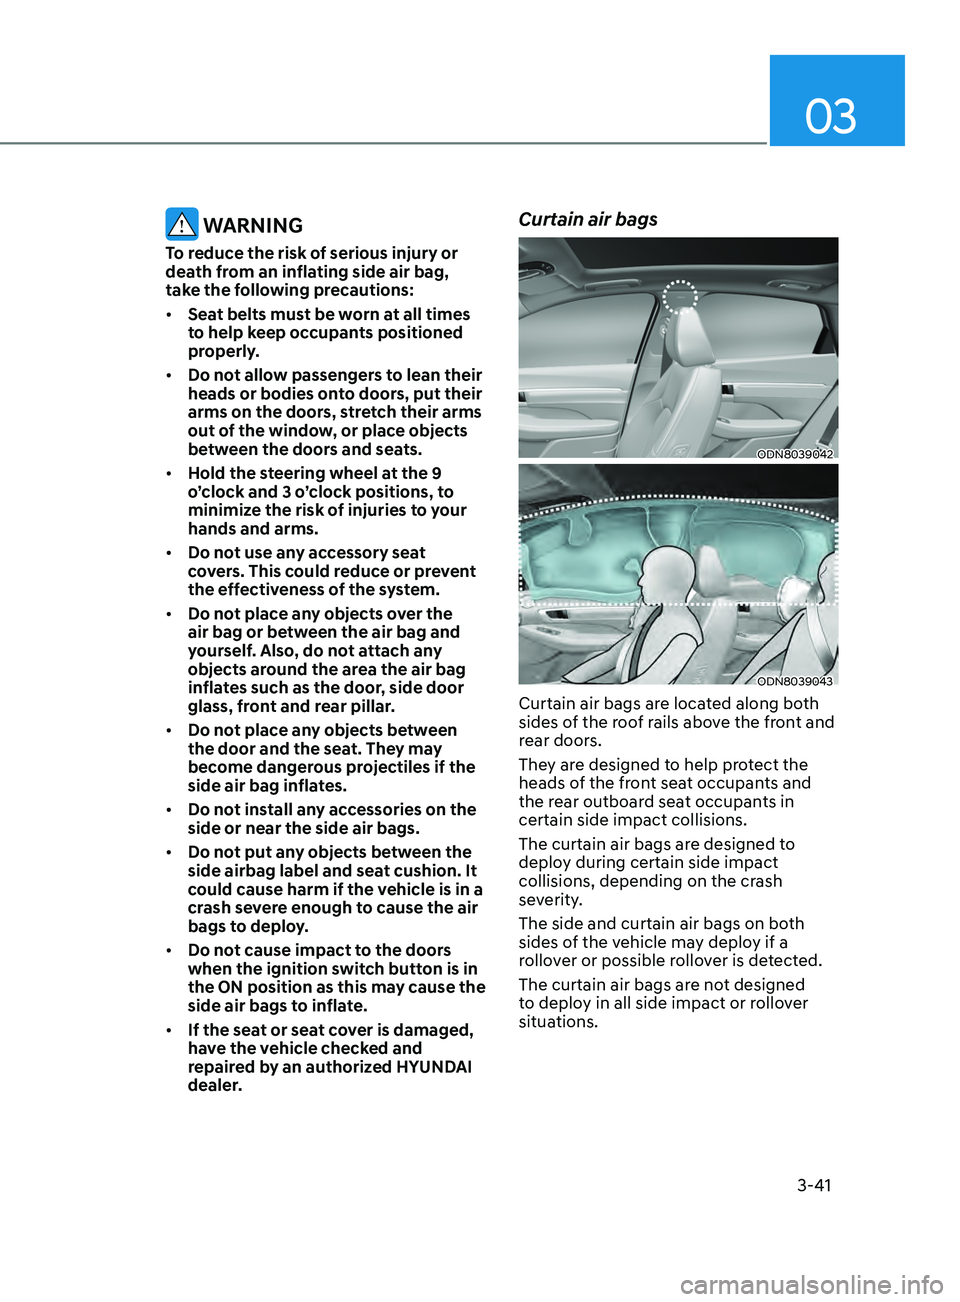 HYUNDAI SONATA LIMITED 2022  Owners Manual 03
3-41
 WARNING
To reduce the risk of serious injury or 
death from an inflating side air bag, 
take the following precautions:
•	Seat belts must be worn at all times 
to help keep occupants positi